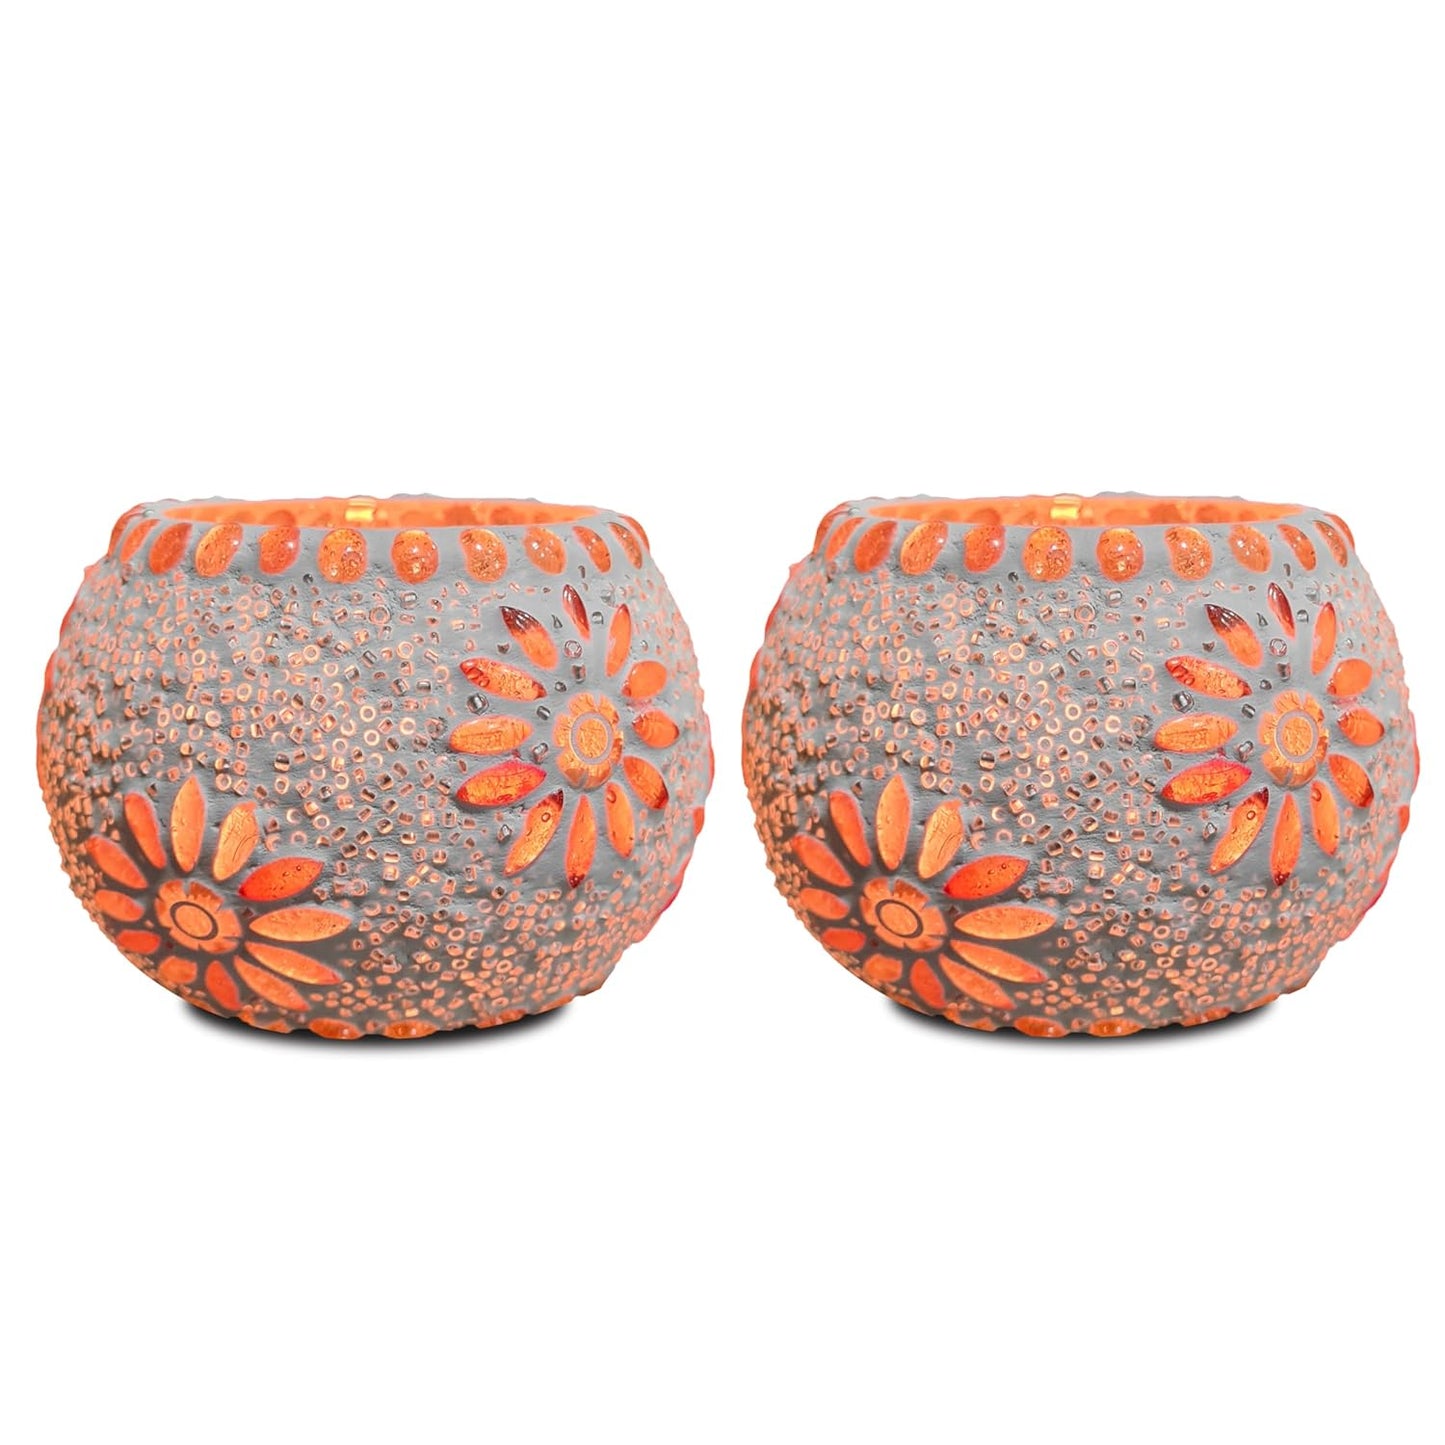 Pair of vibrant lamps with unique patterns.